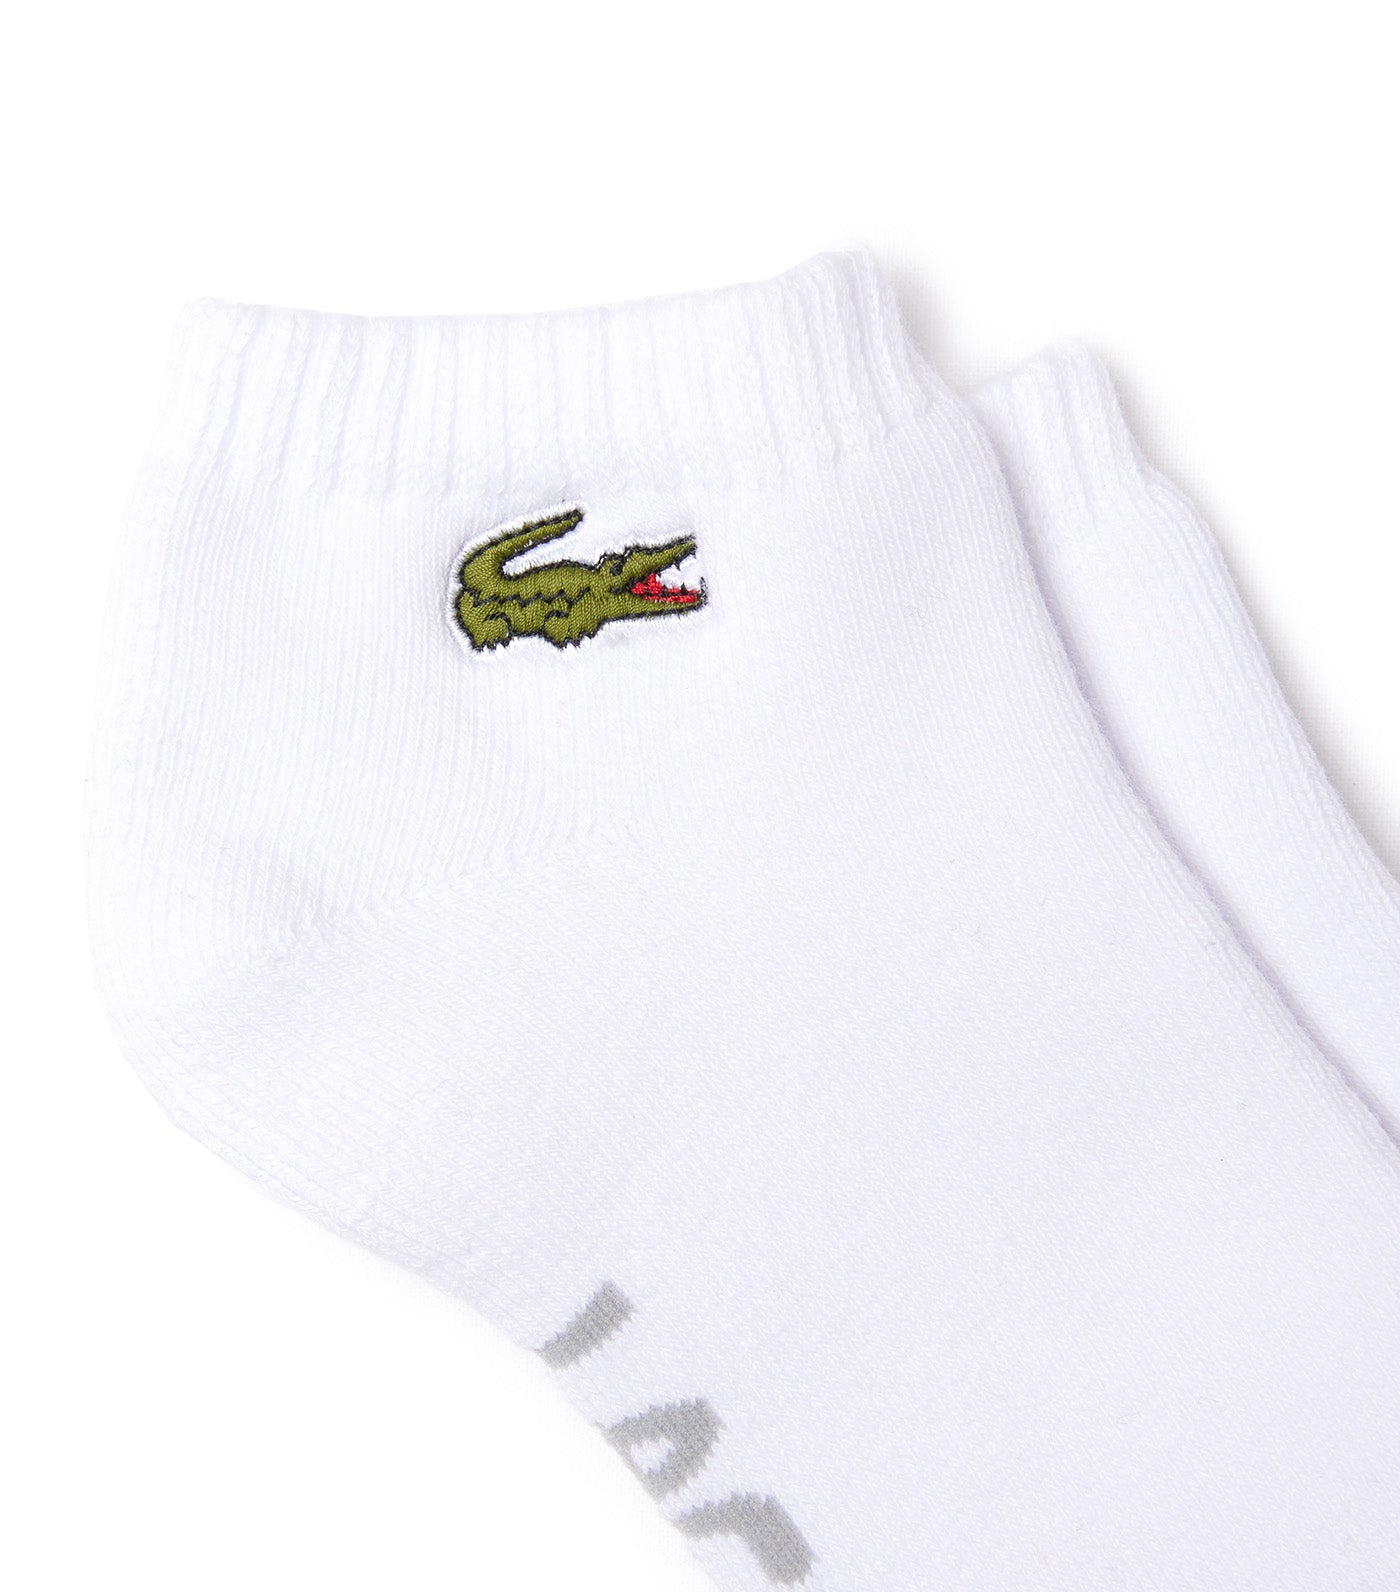 Men's Lacoste SPORT Branded Stretch Cotton Low-Cut Socks White/Silver Chine